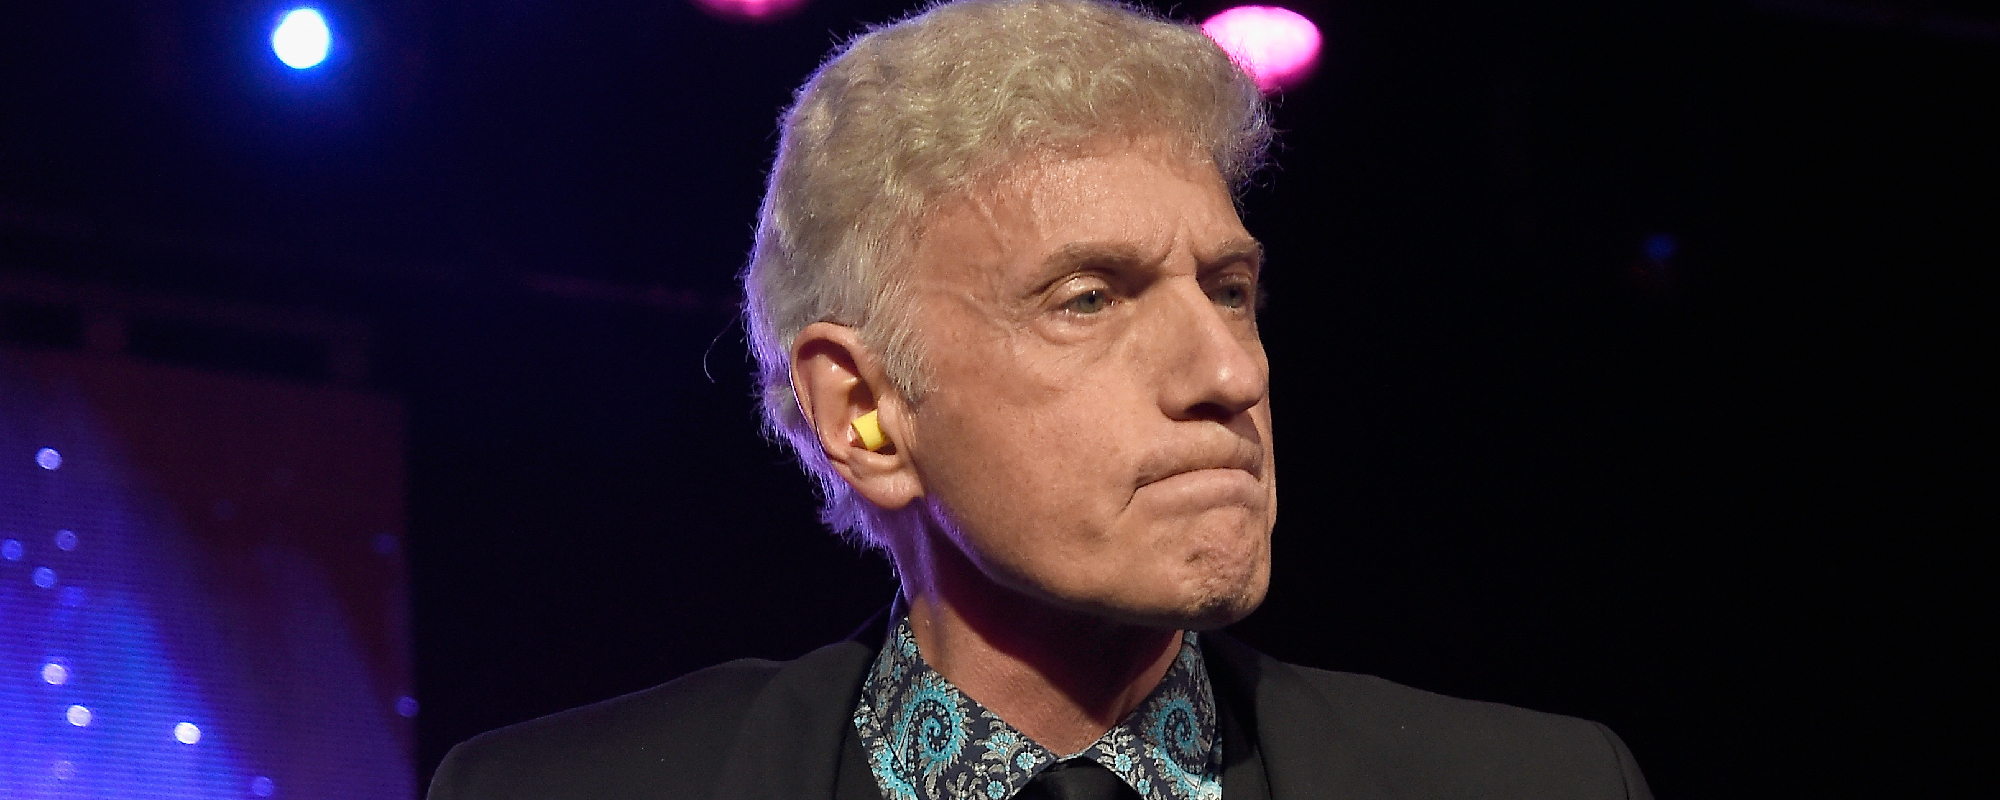 Styx Manager Shares Details on Dennis DeYoung’s Firing and How the Band Hasn’t Spoken to Him Since